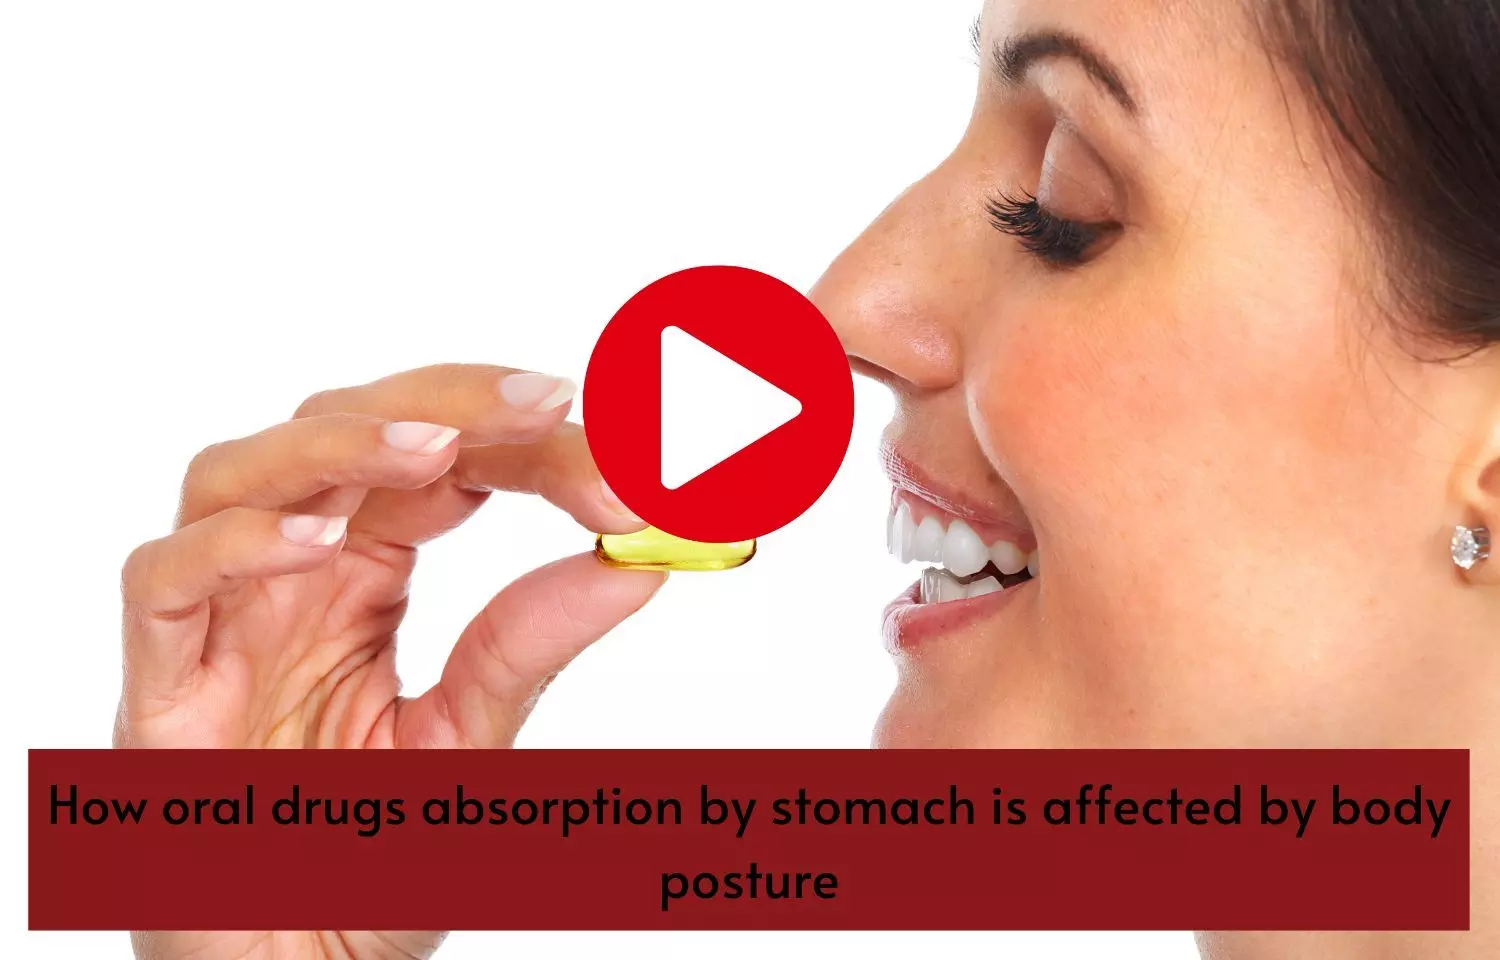 How oral drugs absorption by stomach is affected by body posture